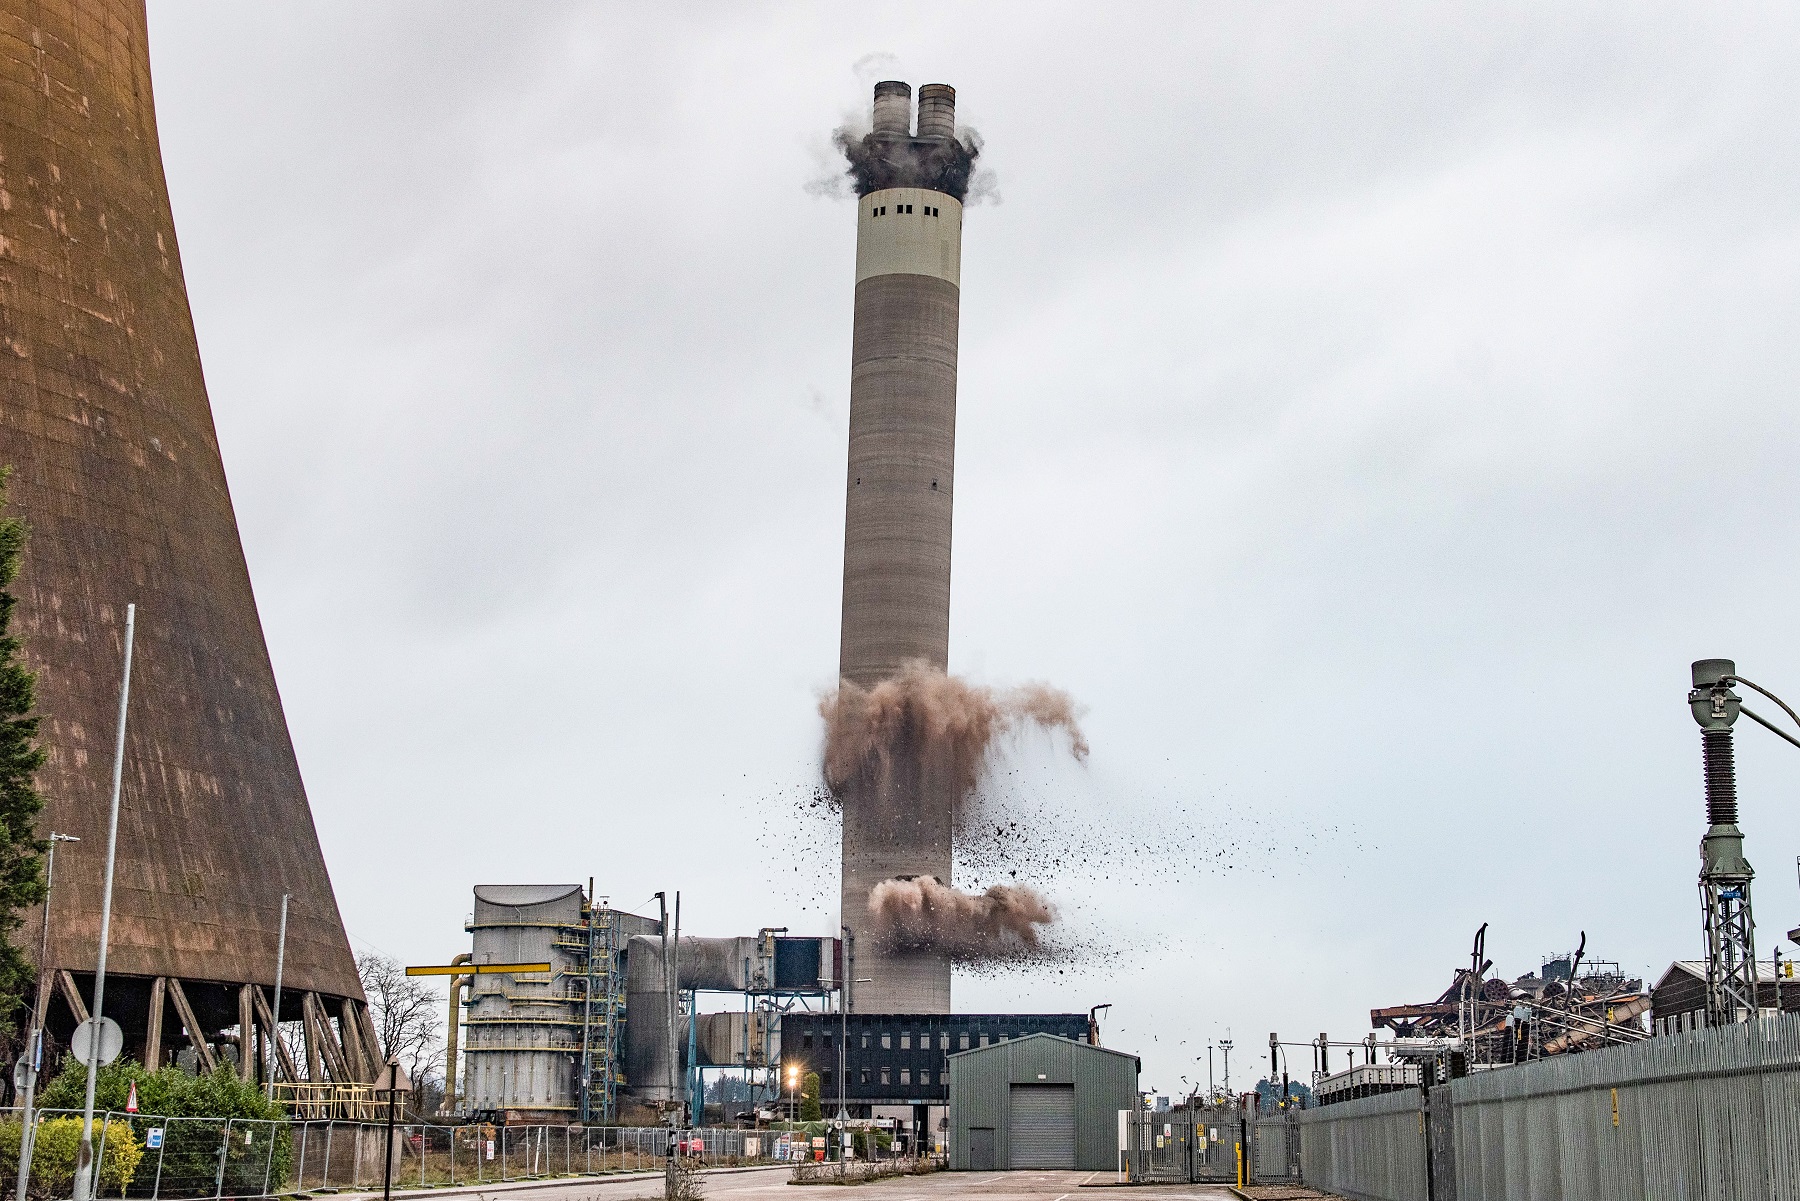 10-stage explosives assignment calls time on Rugeley Power Station